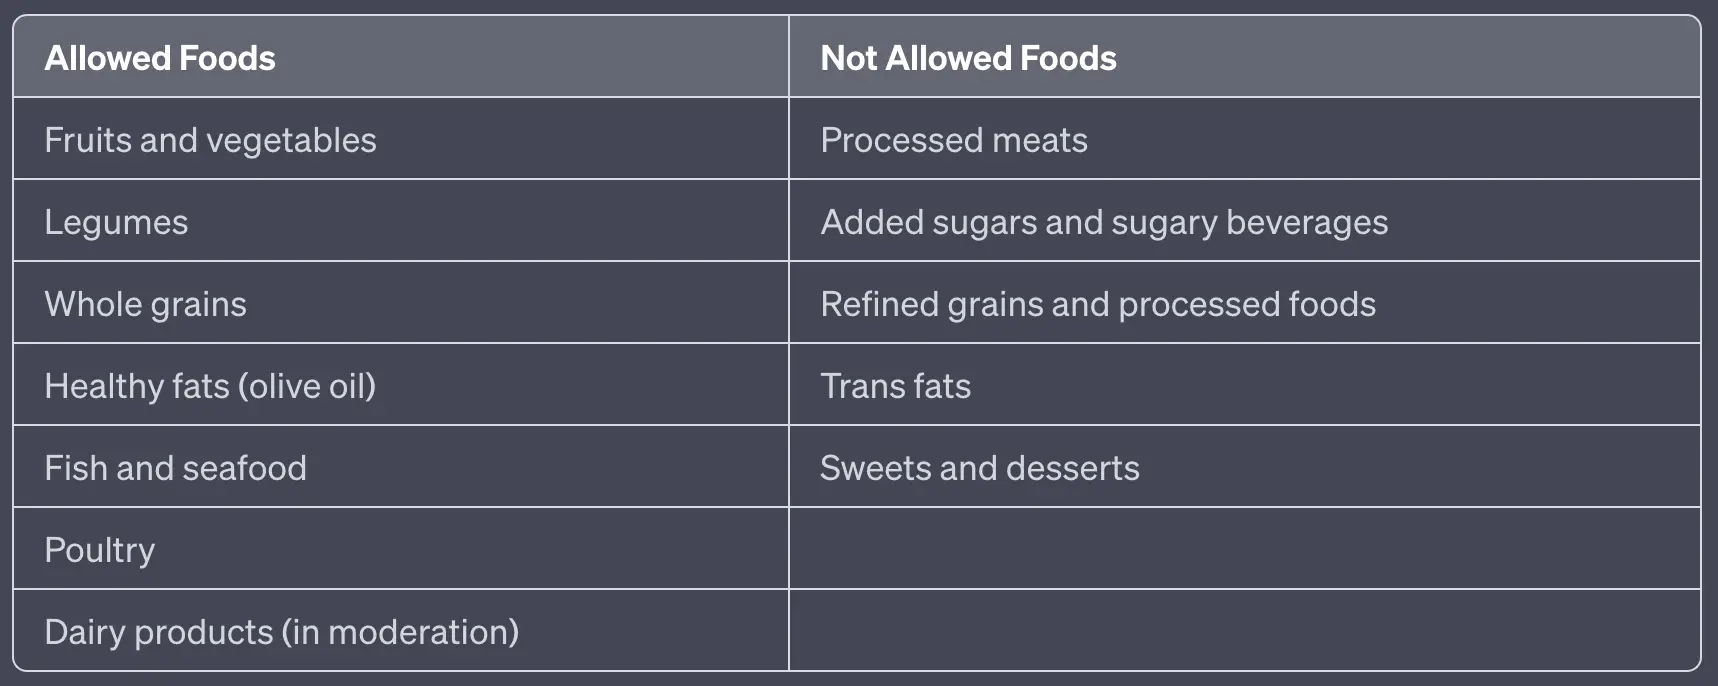 Table of Allowed Foods vs. Not Allowed Foods on the Mediterranean Diet